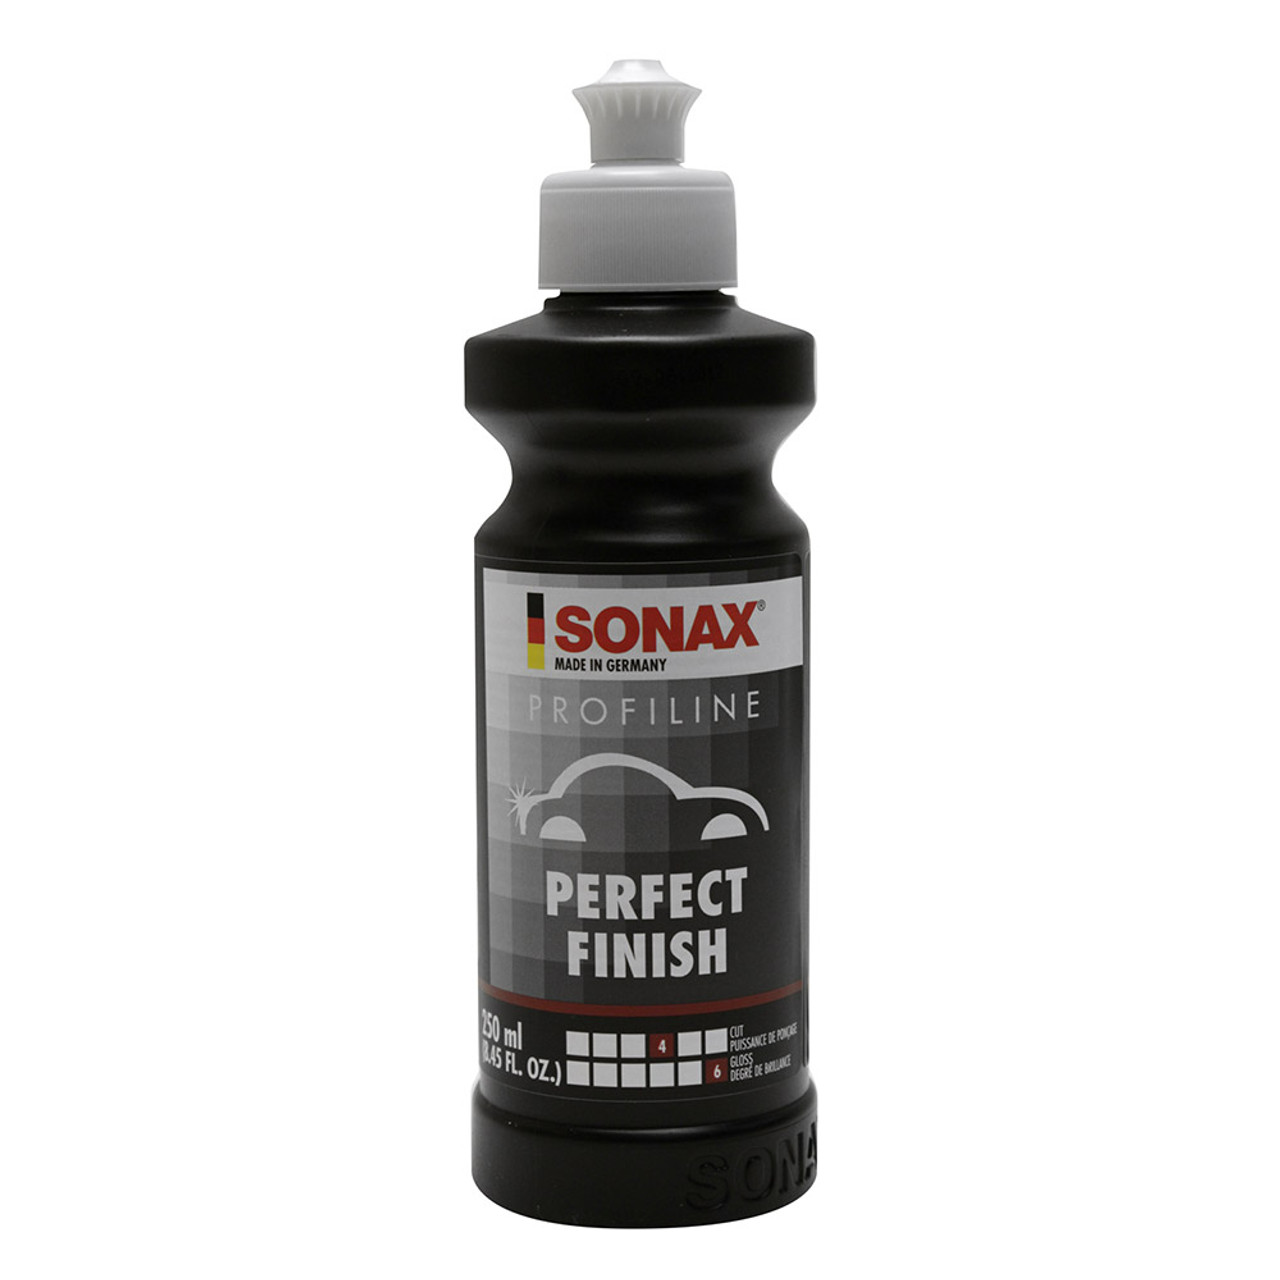 Sonax CutMax & Perfect Finish, 1 Of the Sonax Perfect Combination - Sonax  Profiline Cutmax & - Sonax Profiline Perfect Finish. (Fast. Save Time, No  Dust, No Filler, No Silicone) We